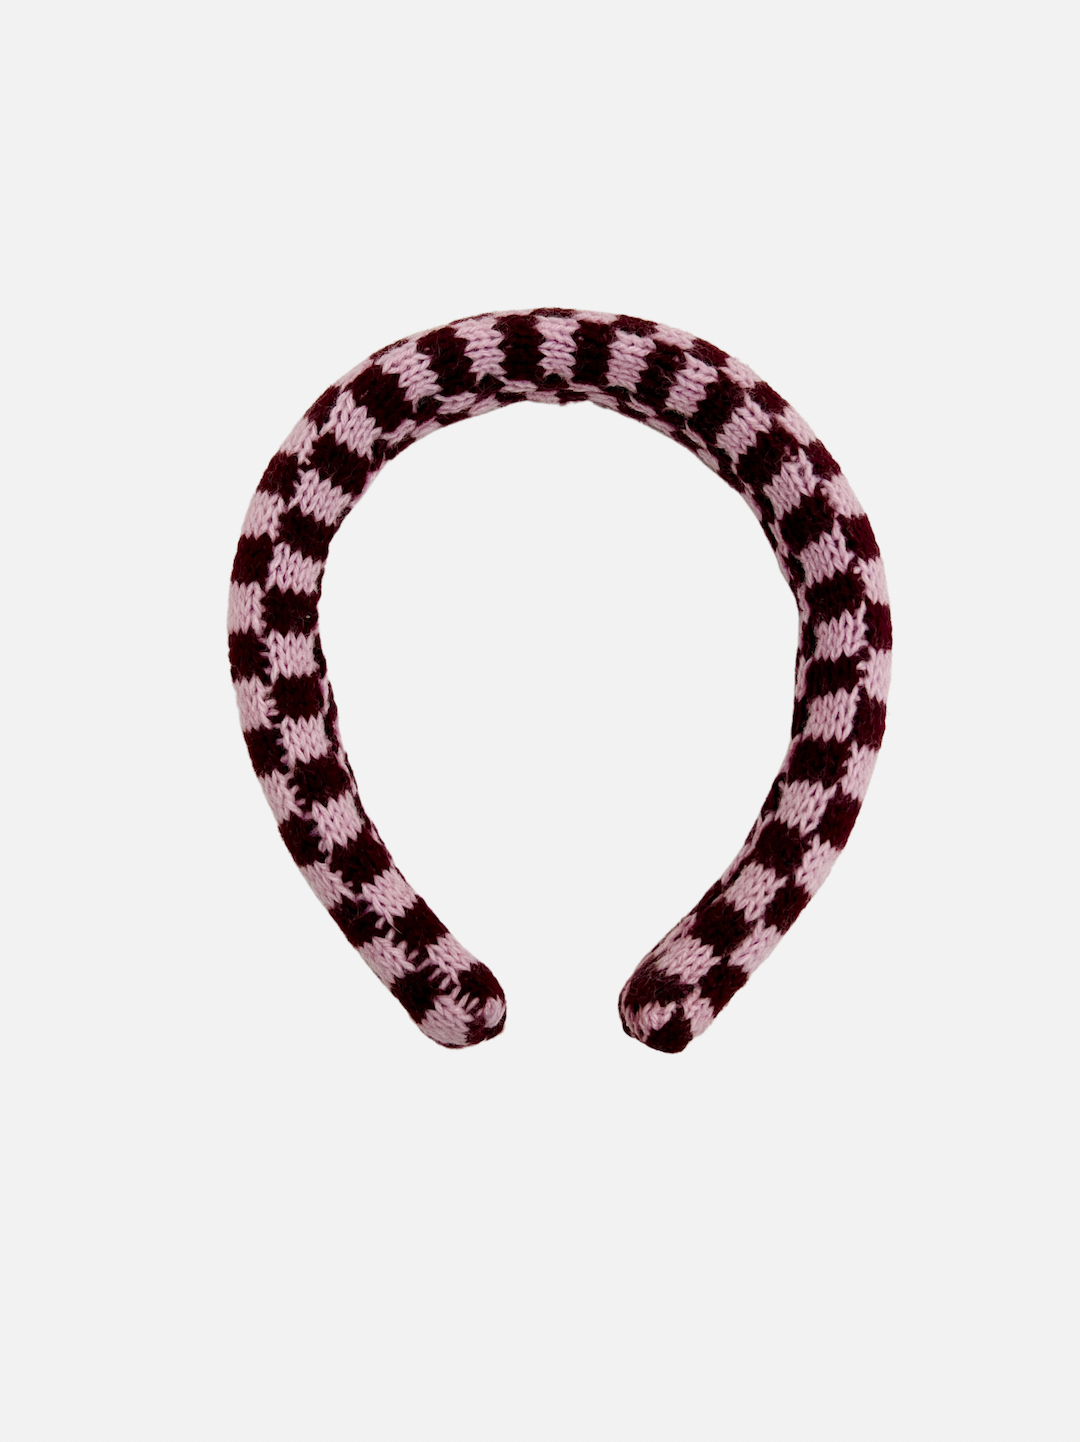 Burgundy/Lilac Checks | A kids' knitted headband in a pink and dark red check